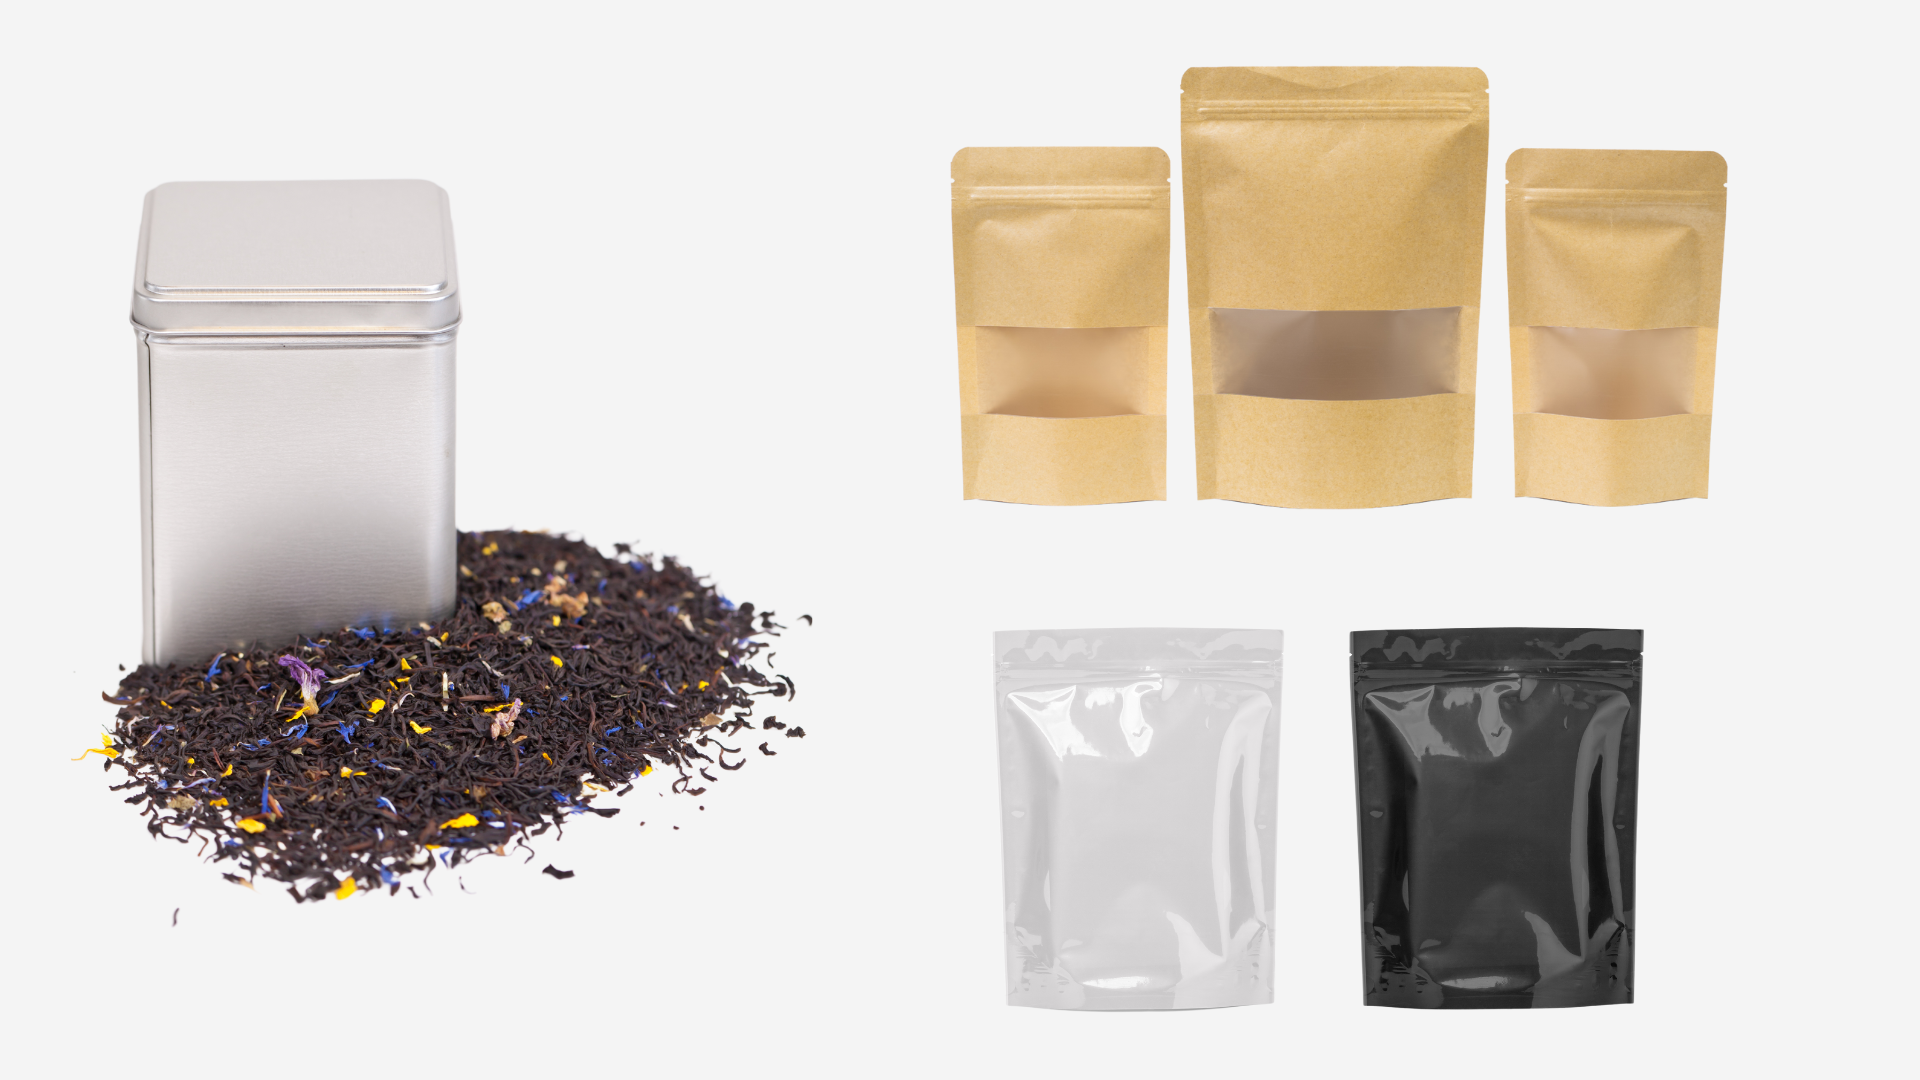 Our offers to start your project 1.	Autonomous offer: Buy directly on our website your tea in bulk + the bags to be filled. Put the tea in bags yourself and sell your brand 2.	Bulk bagging offer (personalized): Choose on our website the references you like. We will pack the tea in bulk bags with your own branded label (full bag printing also available): You benefit from our organic certification! Ask for a quote now: send an email to commercial@obvioustea.com 3.	Offer for muslin bags (personalised): Choose on our website the references you like. We can put your tea in muslin bags: see below "Create your own brand of tea in bags".  